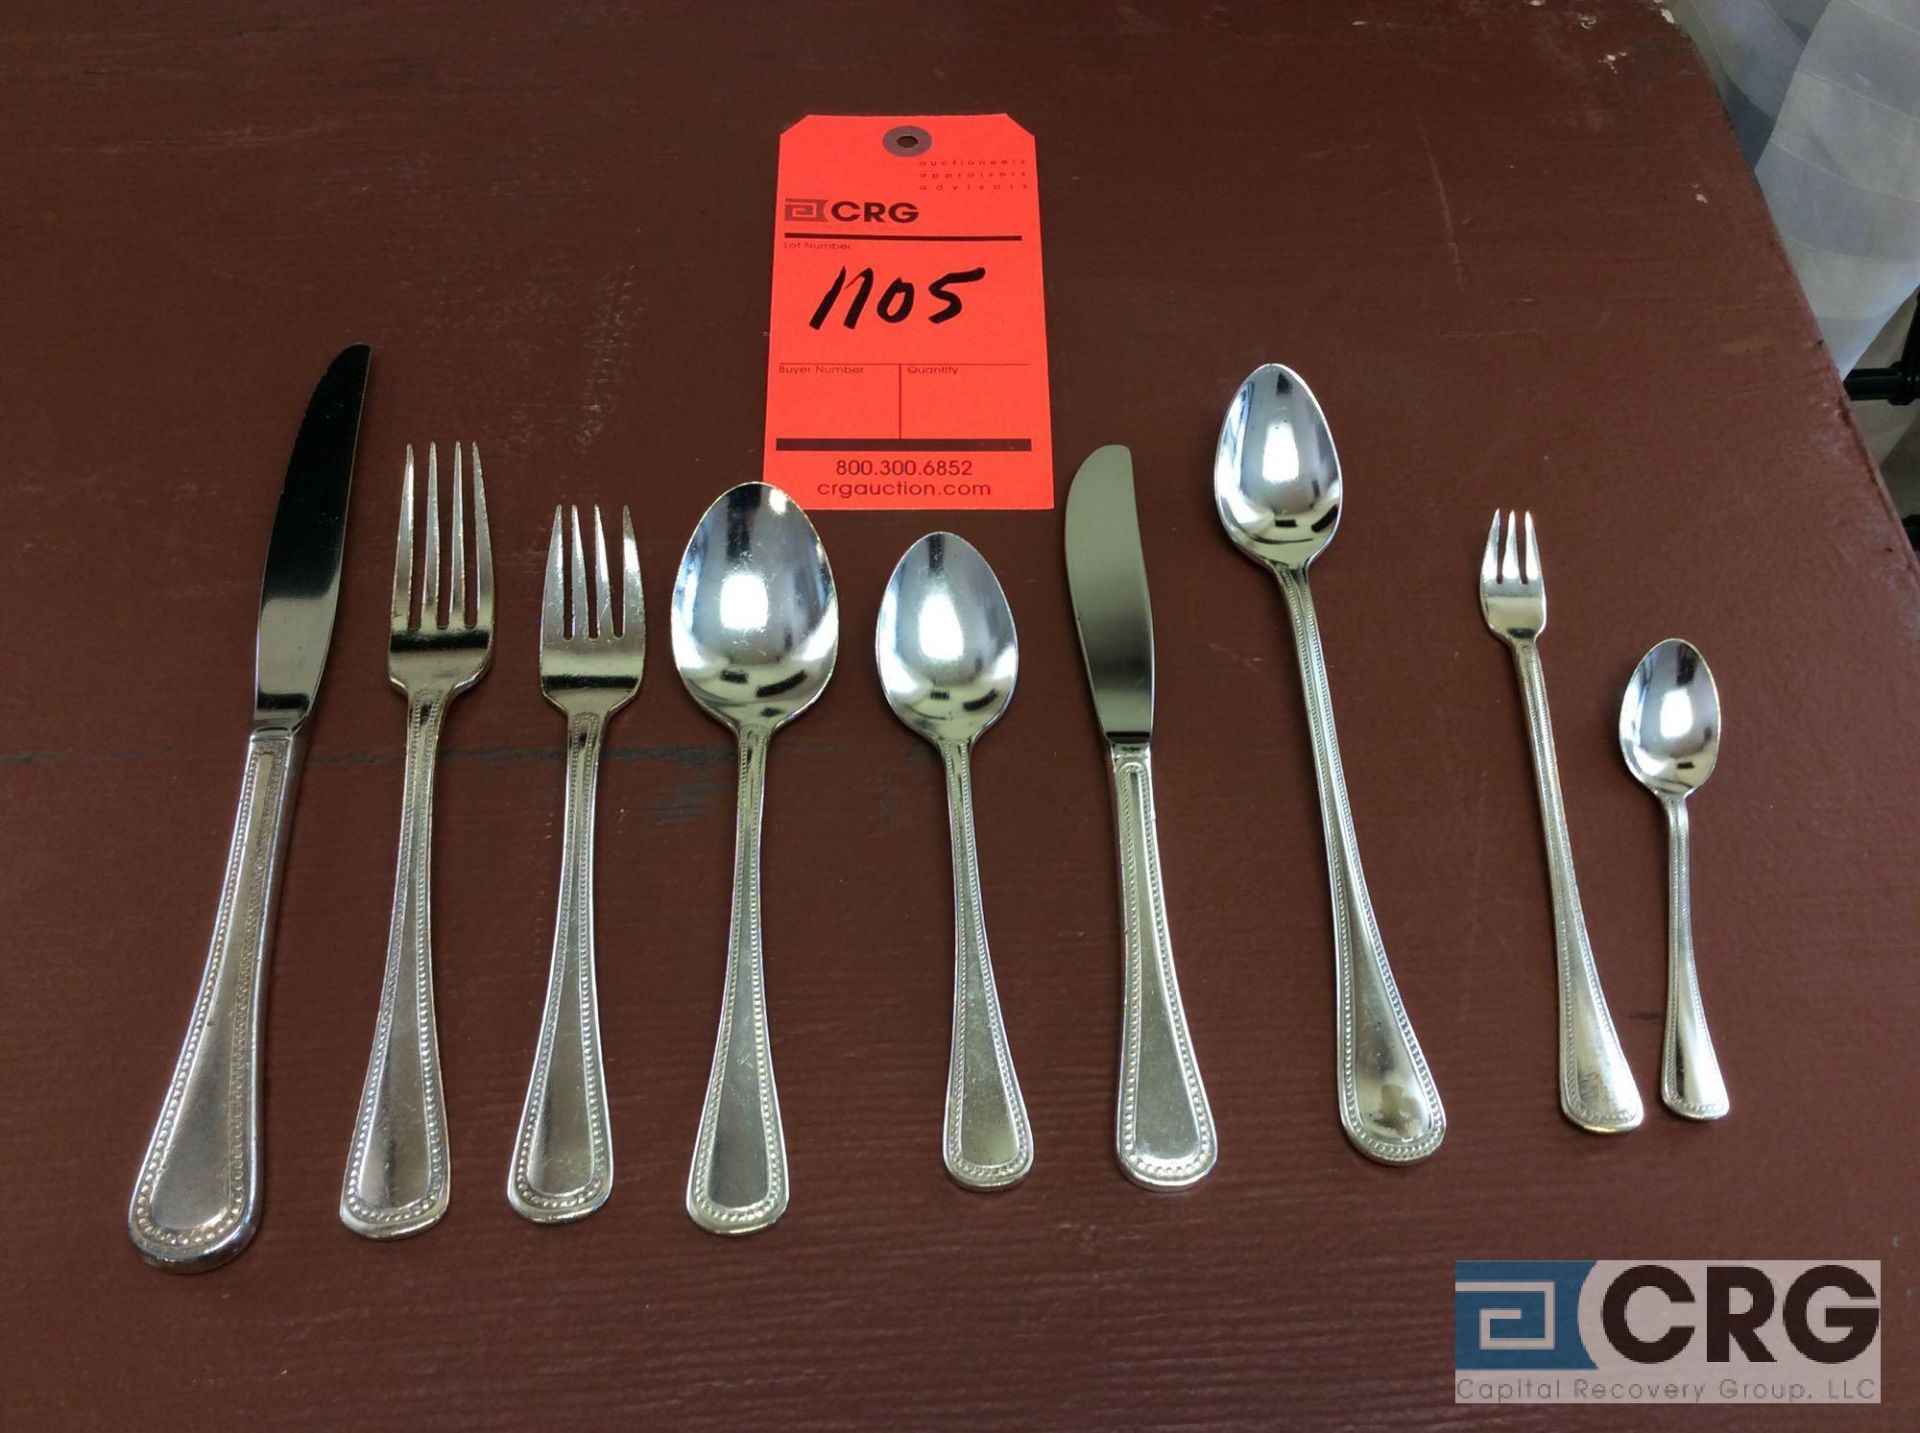 Lot of patrician pattern silver plated flatware including (660) dinner forks, (648) dinner